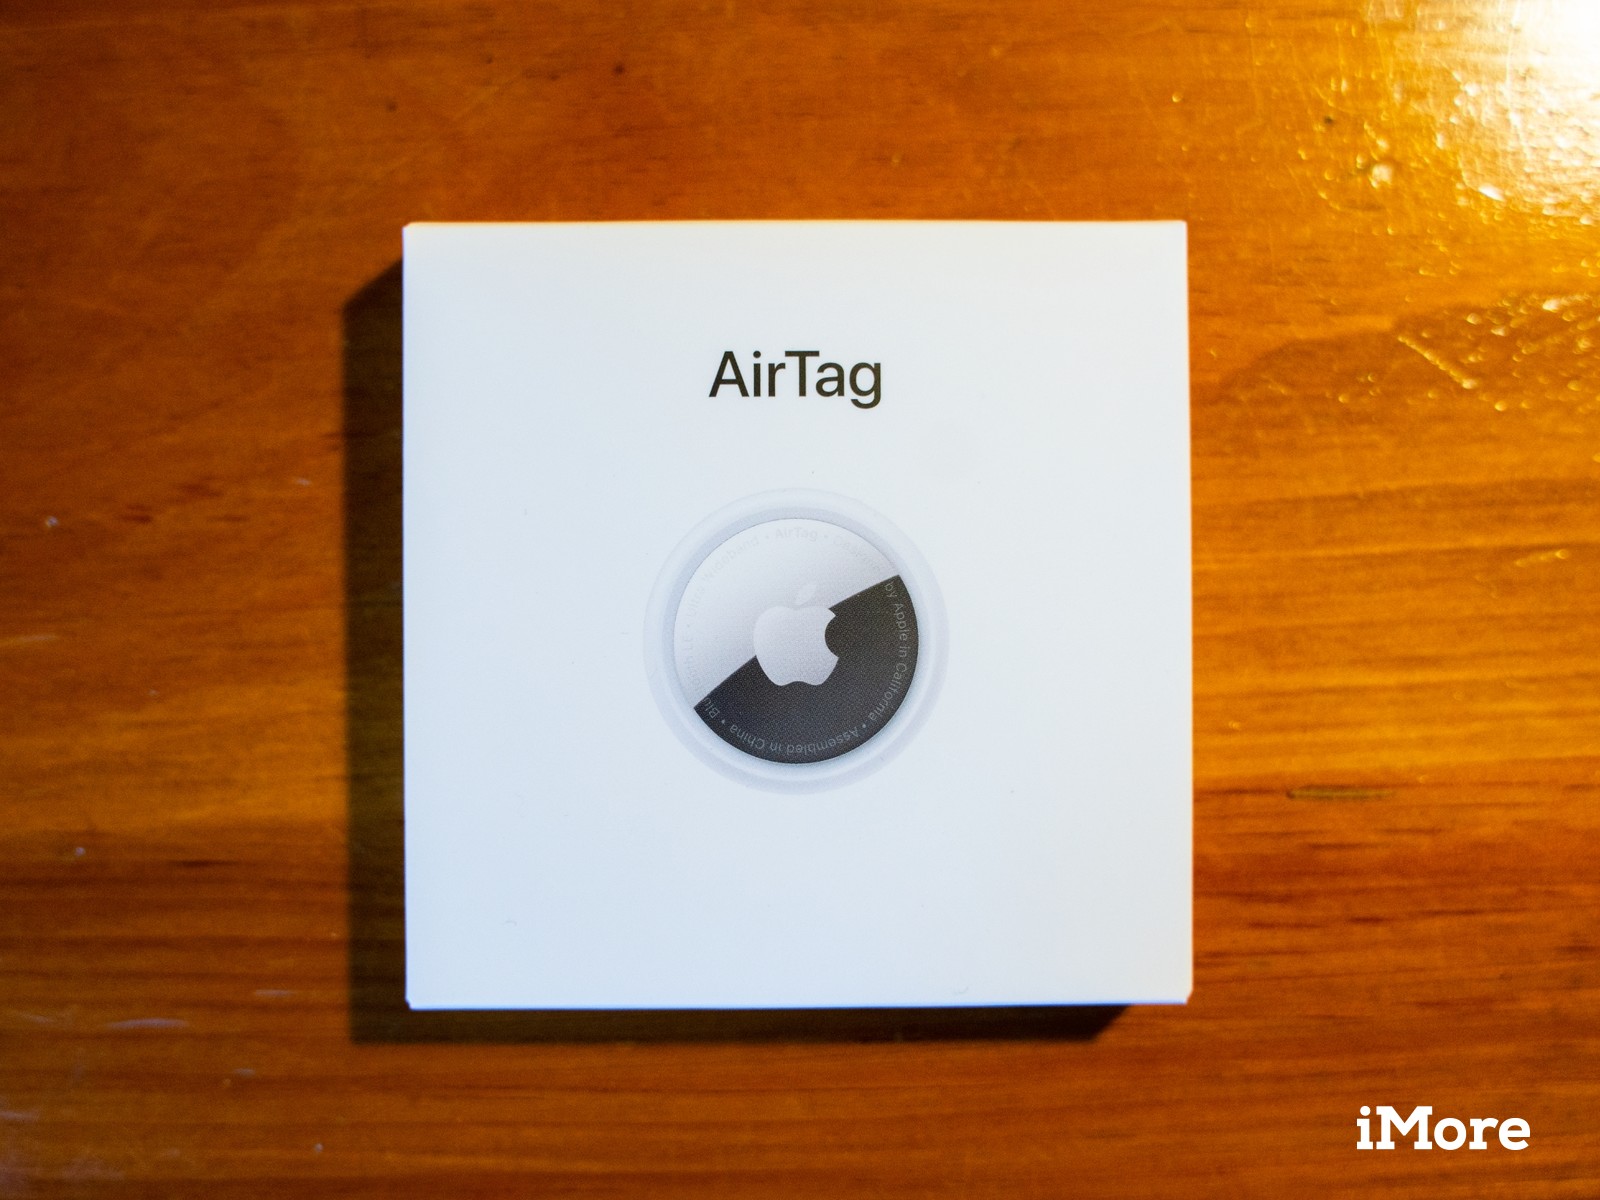  Apple AirTag – An Open Source Device With High Performance and Convenience!